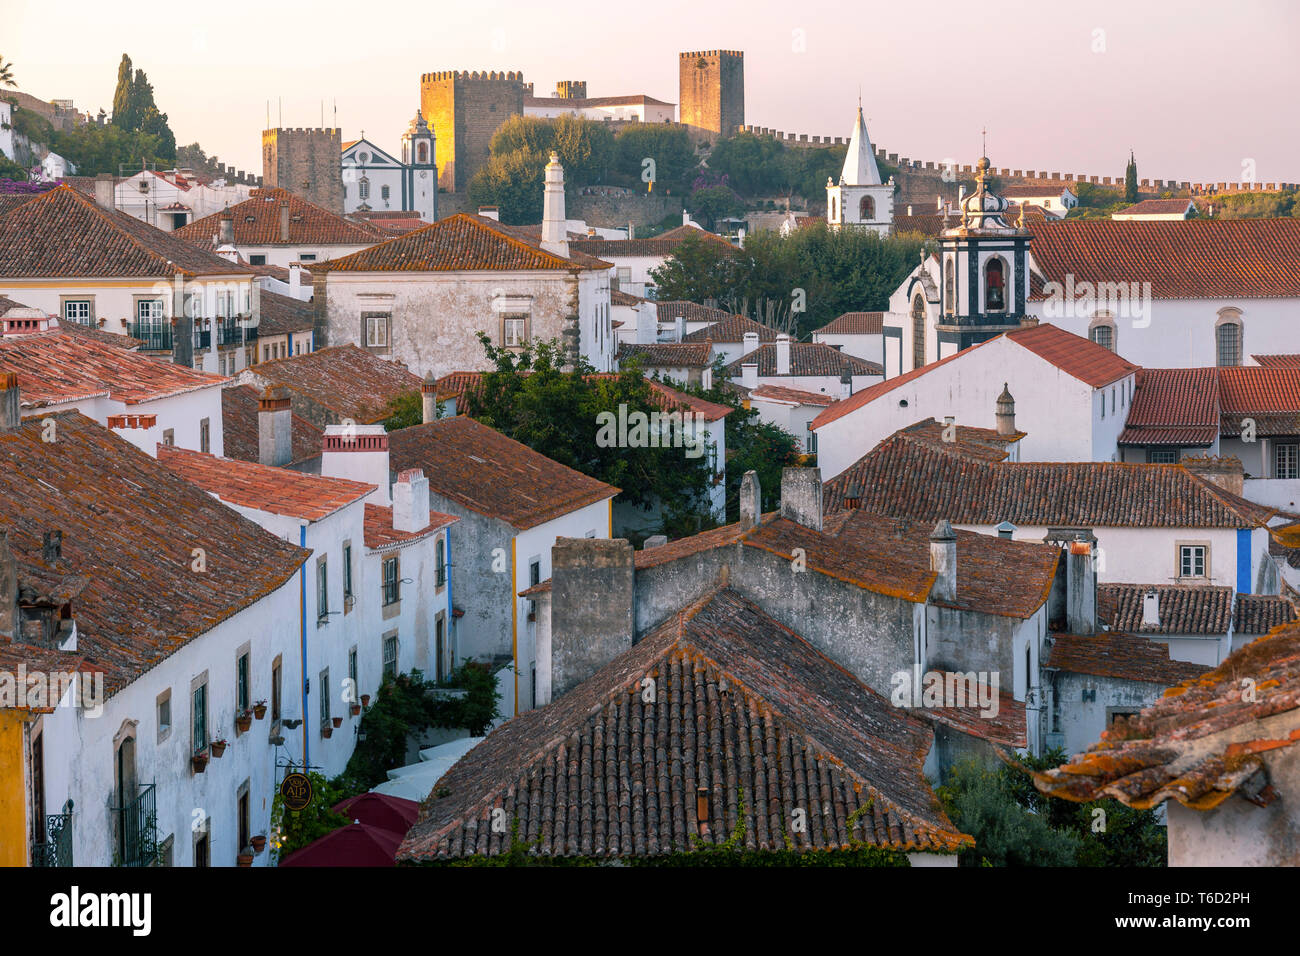 Obidos at dusk, one of the most beautiful medieval villages in Portugal, taken to the moors in the 12th century. Stock Photo